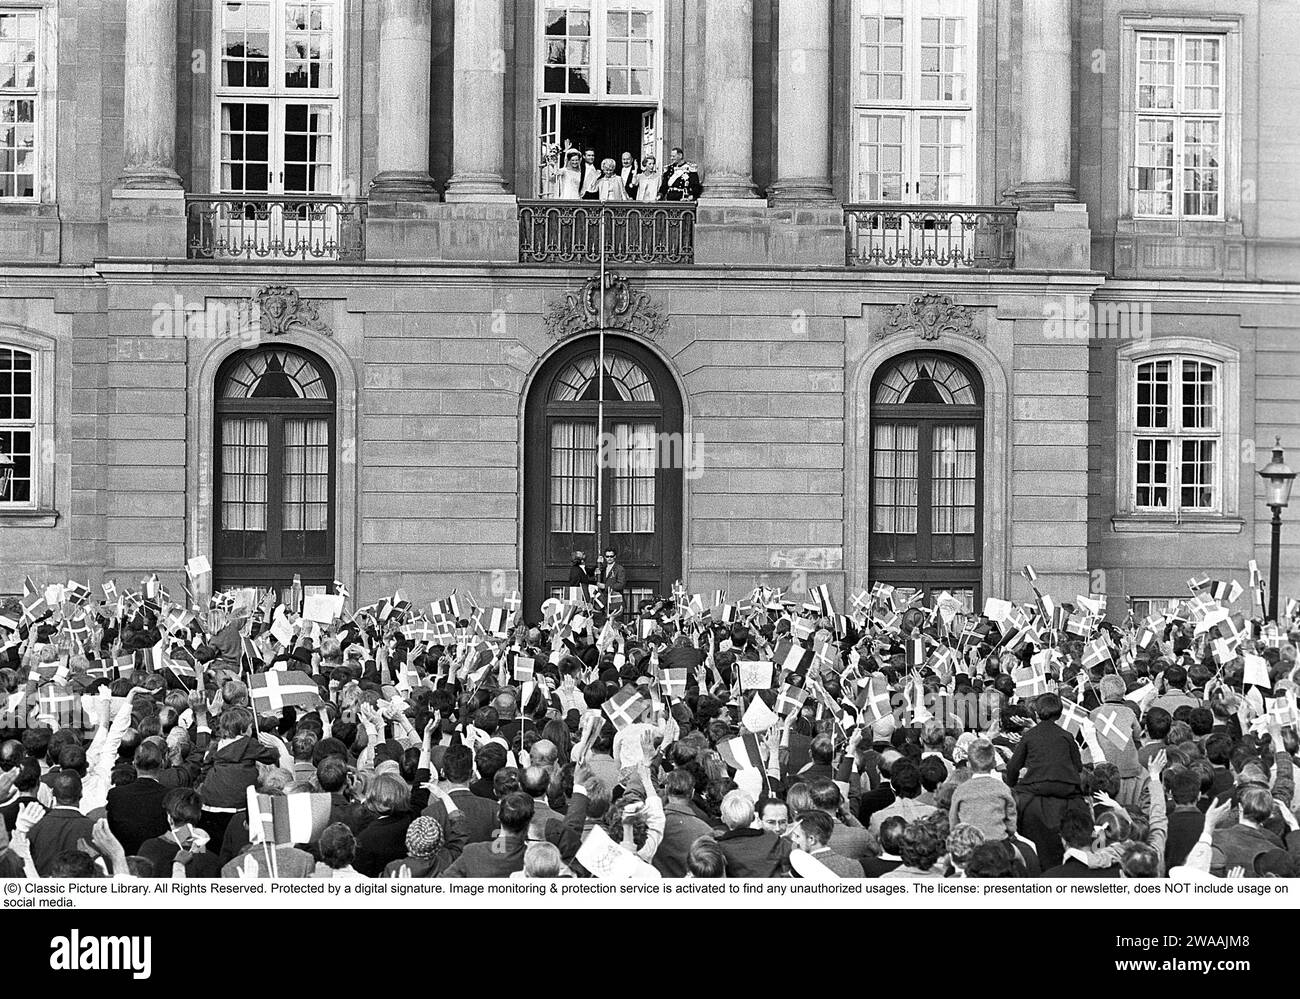 Margrethe II of Denmark. Pictured with Henri de Laborde de Monpezat at Fredensborg palace in Copenhagen after their wedding on June 10 1967. Greeted by a crowd of people waving flags. Stock Photo